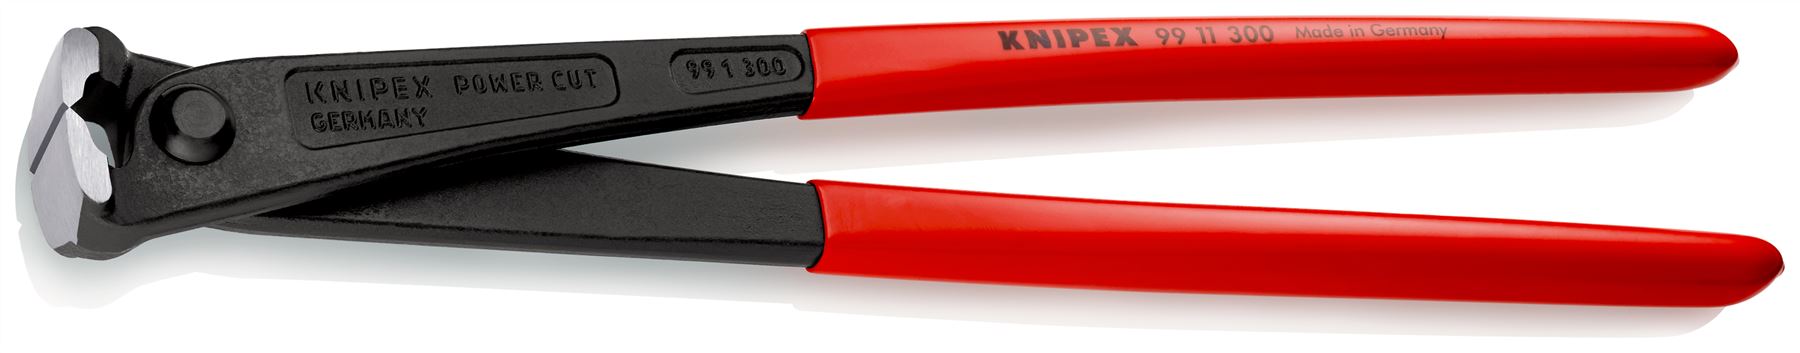 KNIPEX Concreters Nipper High Leverage 300mm Plastic Coated Handles 99 11 300